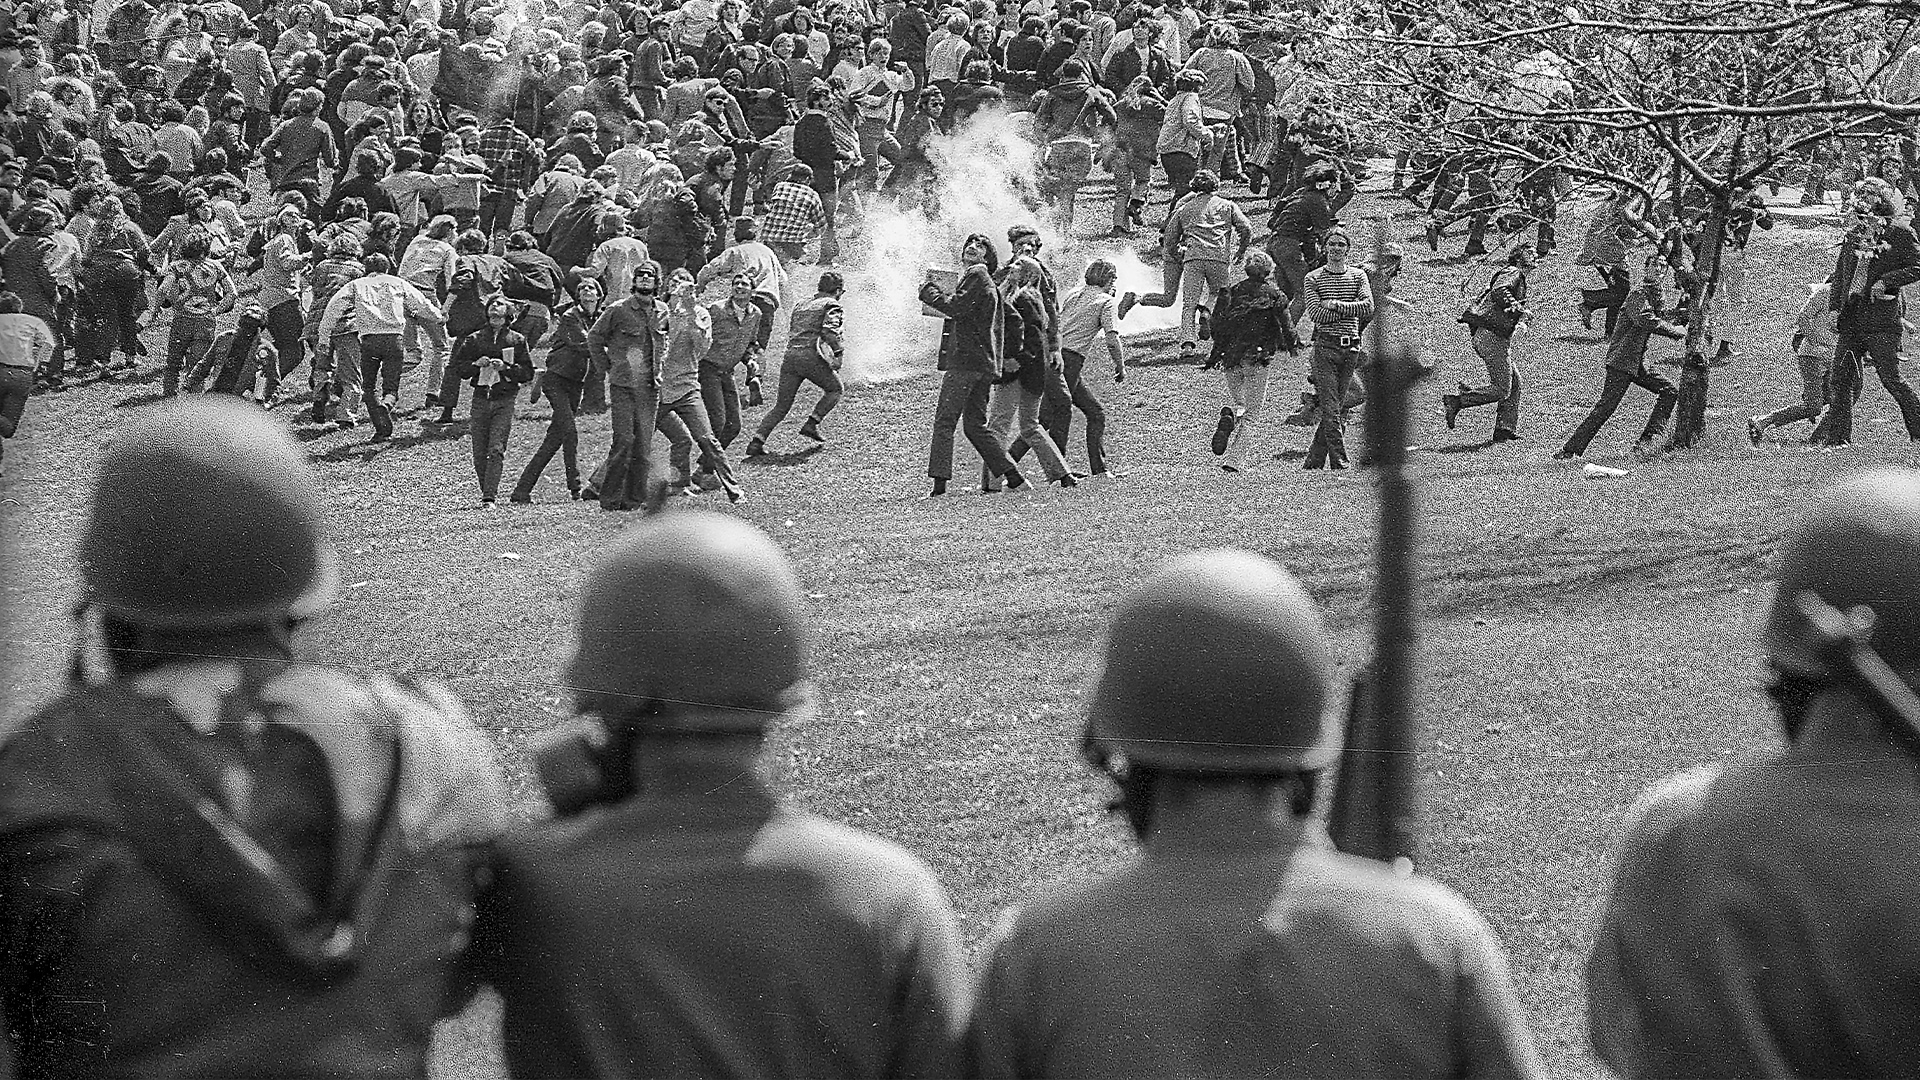 I was paralyzed by the National Guard in deadly Kent State shootings - campus protesters must 